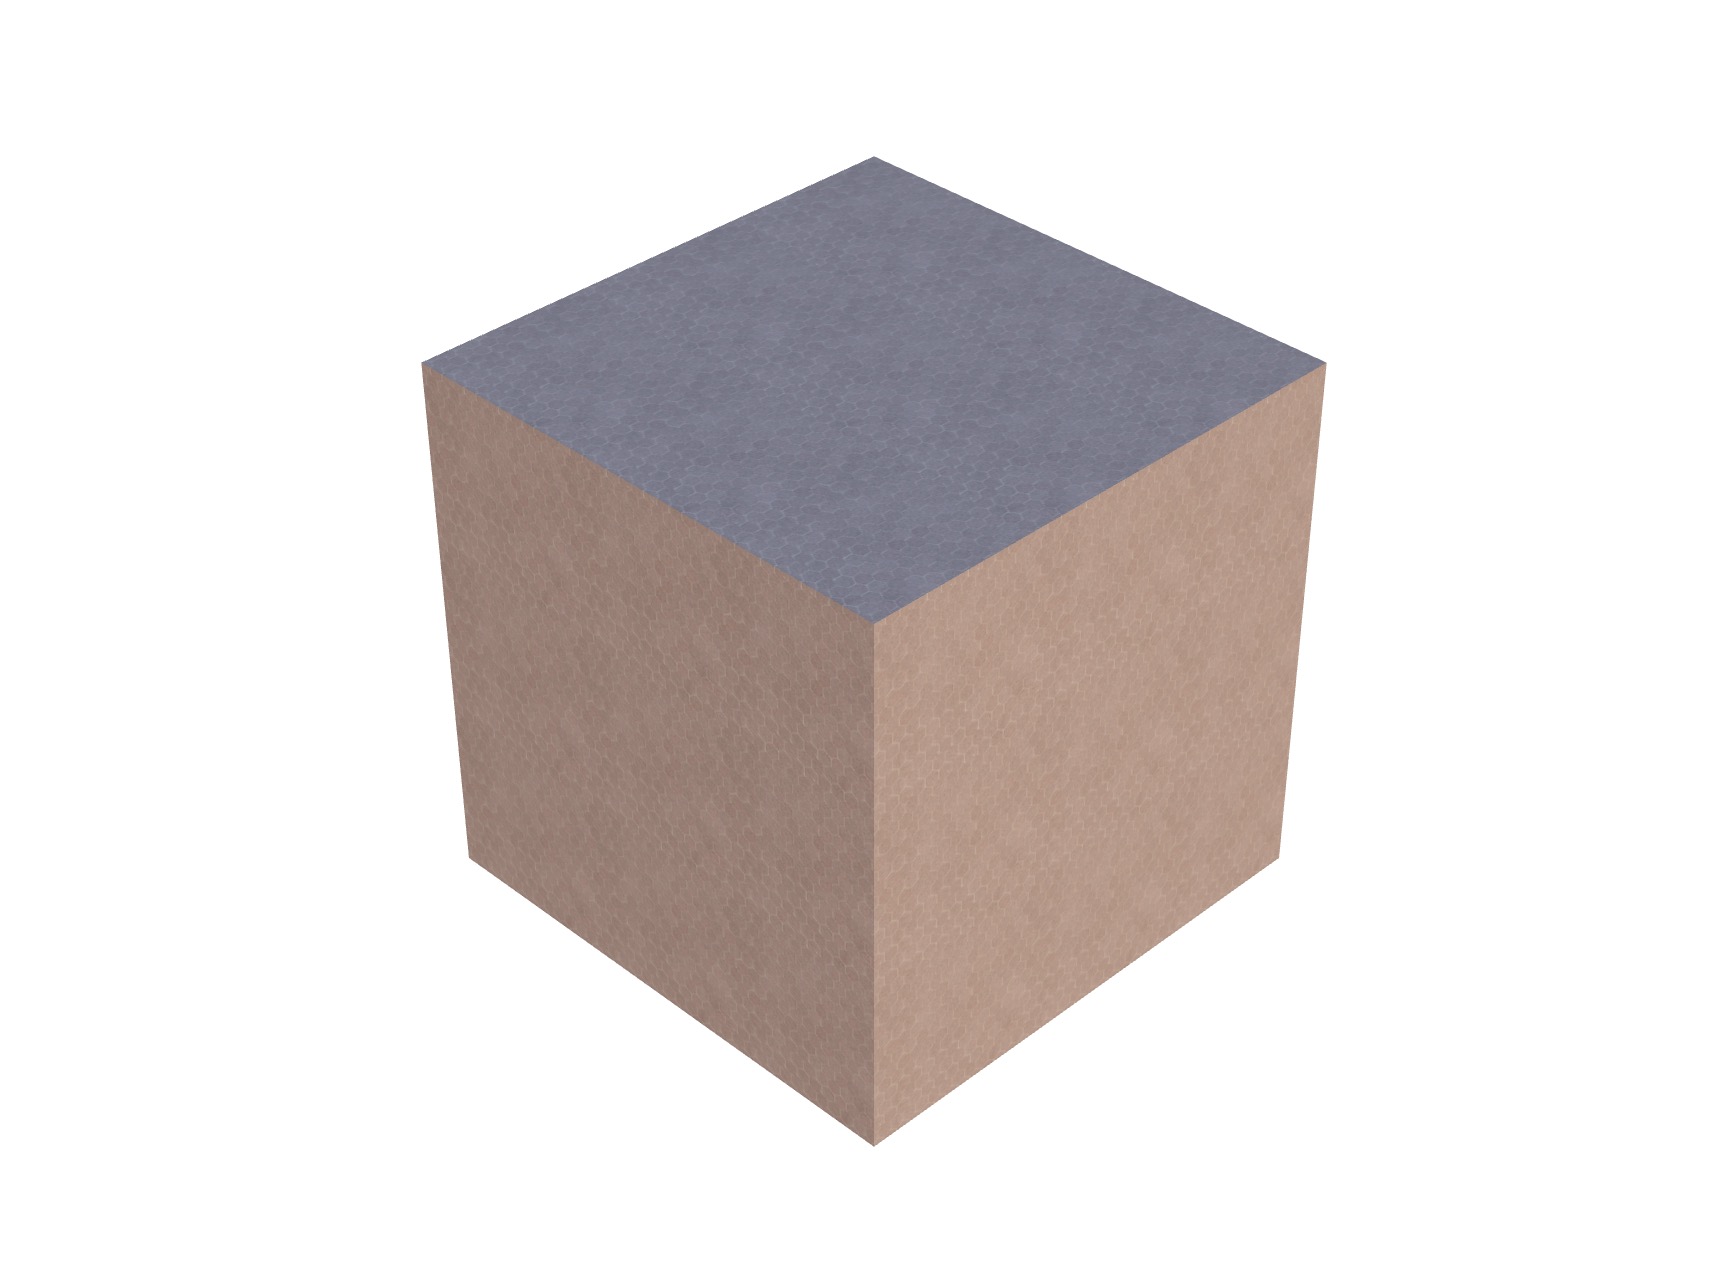 Texture on the cube